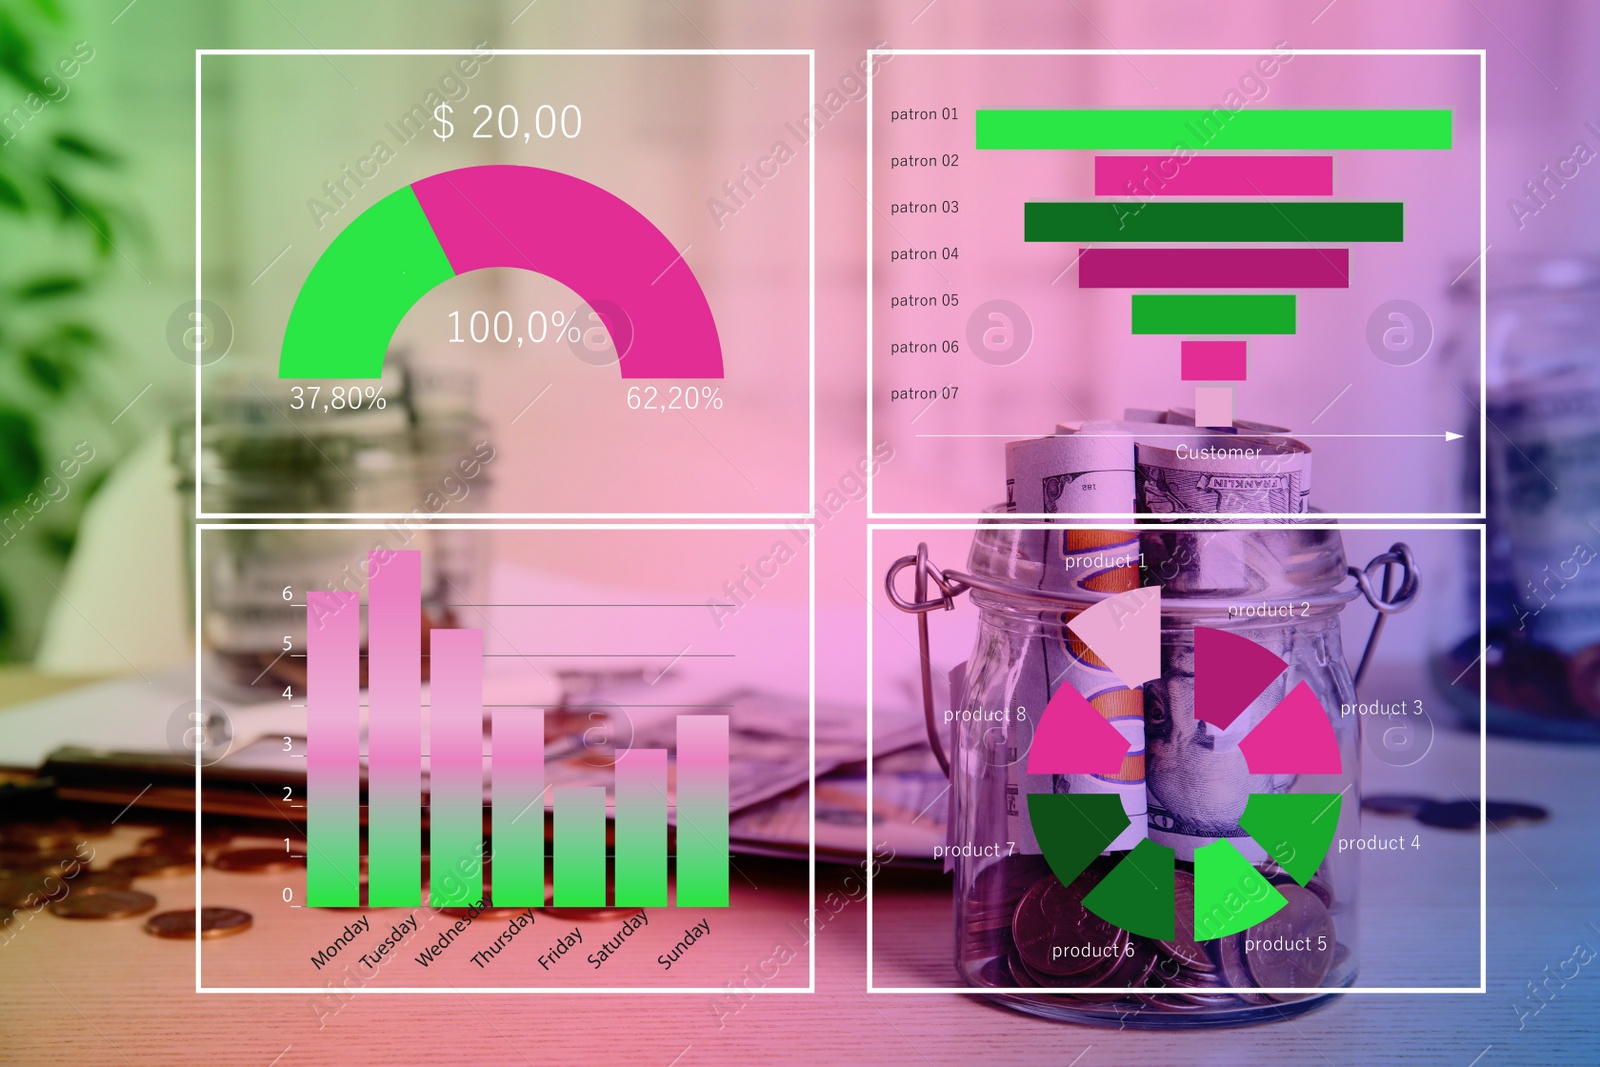 Image of Forex trading. Glass jar with money on table and charts